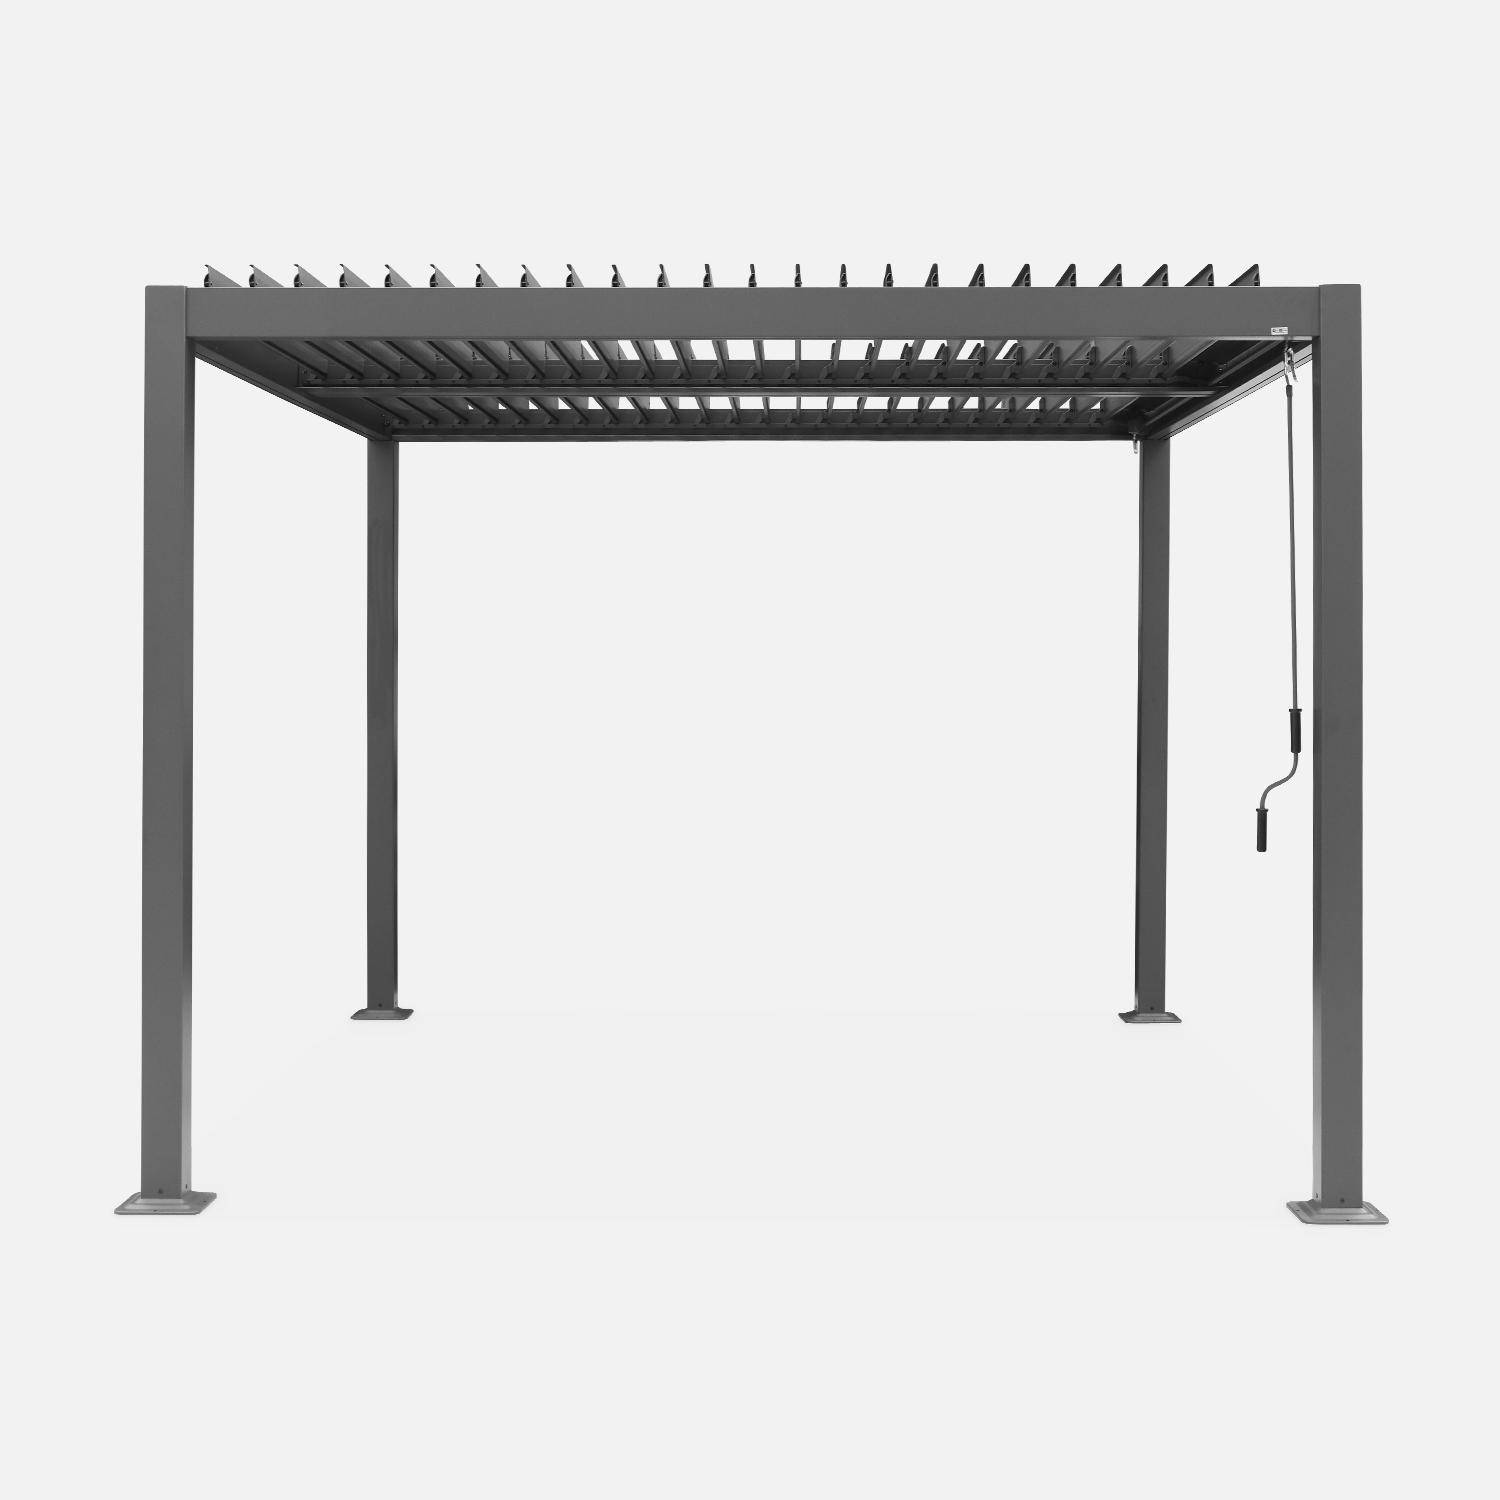 3x3 Bioclimatic Louvred Pergola with Adjustable Slats for Year-Round Outdoor Comfort, Anthracite Photo2